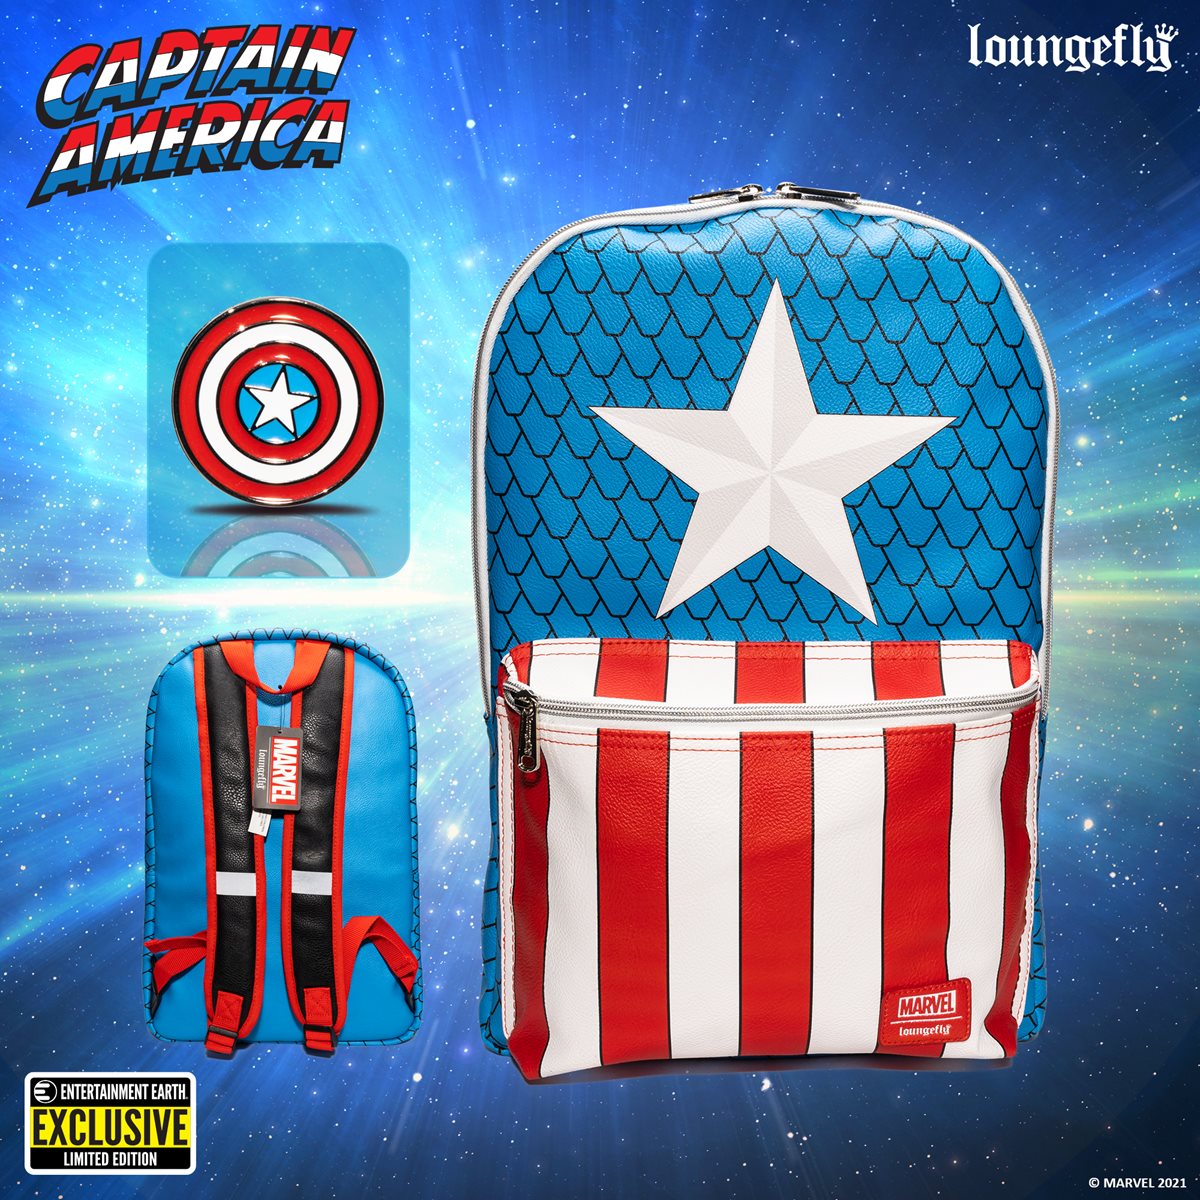 Loungefly: Marvel Avengers - Captain America 3 Collectors Pin,   Exclusive,Multicolor,MVPN0142